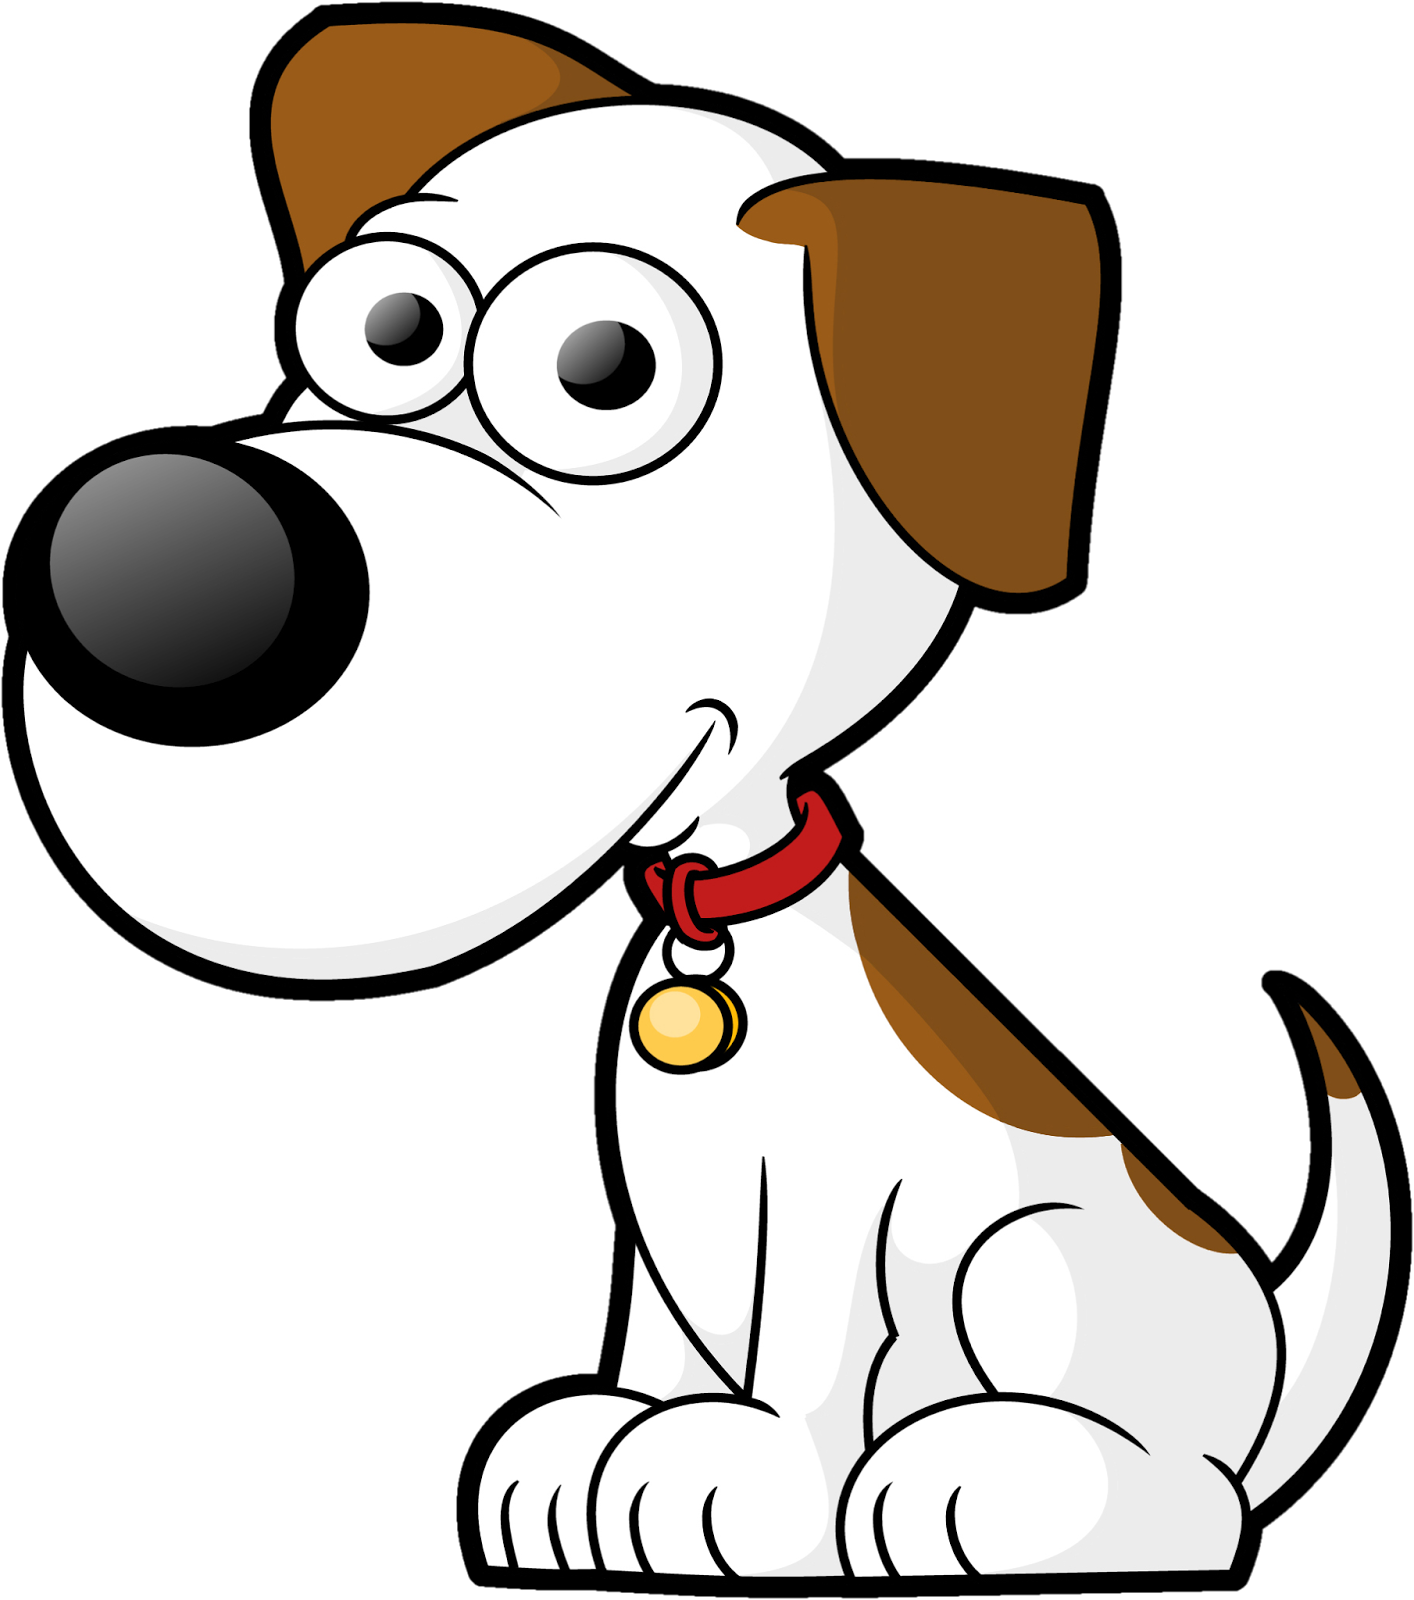 Clipart explosion simple cartoon. Puppy pencil and in